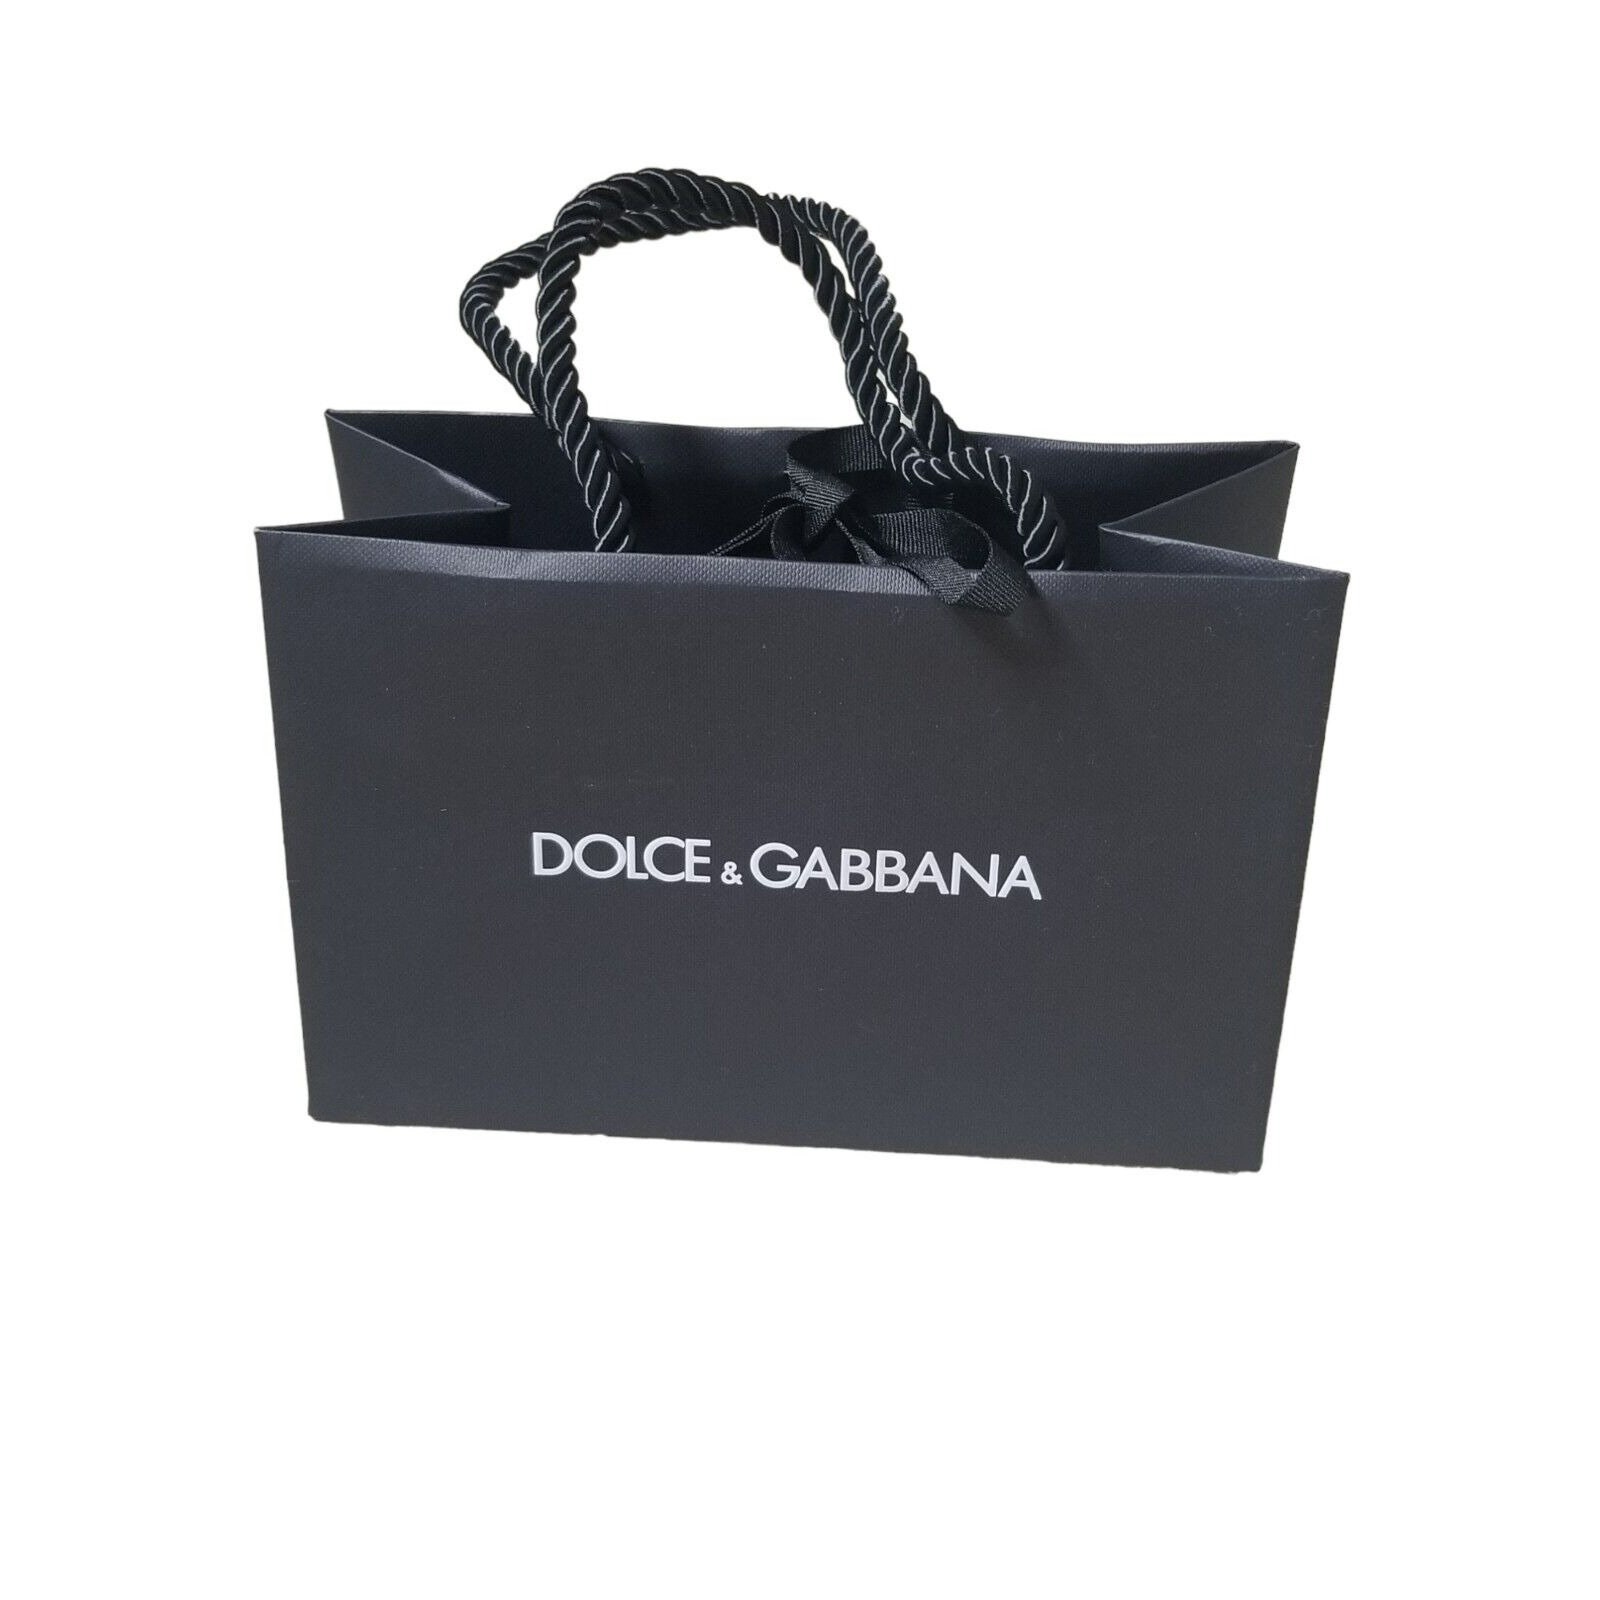 NEW Dolce & Gabbana Paper Gift Bag 8.5 X 5.5 X 4.5 Authentic Never Used -  Etsy